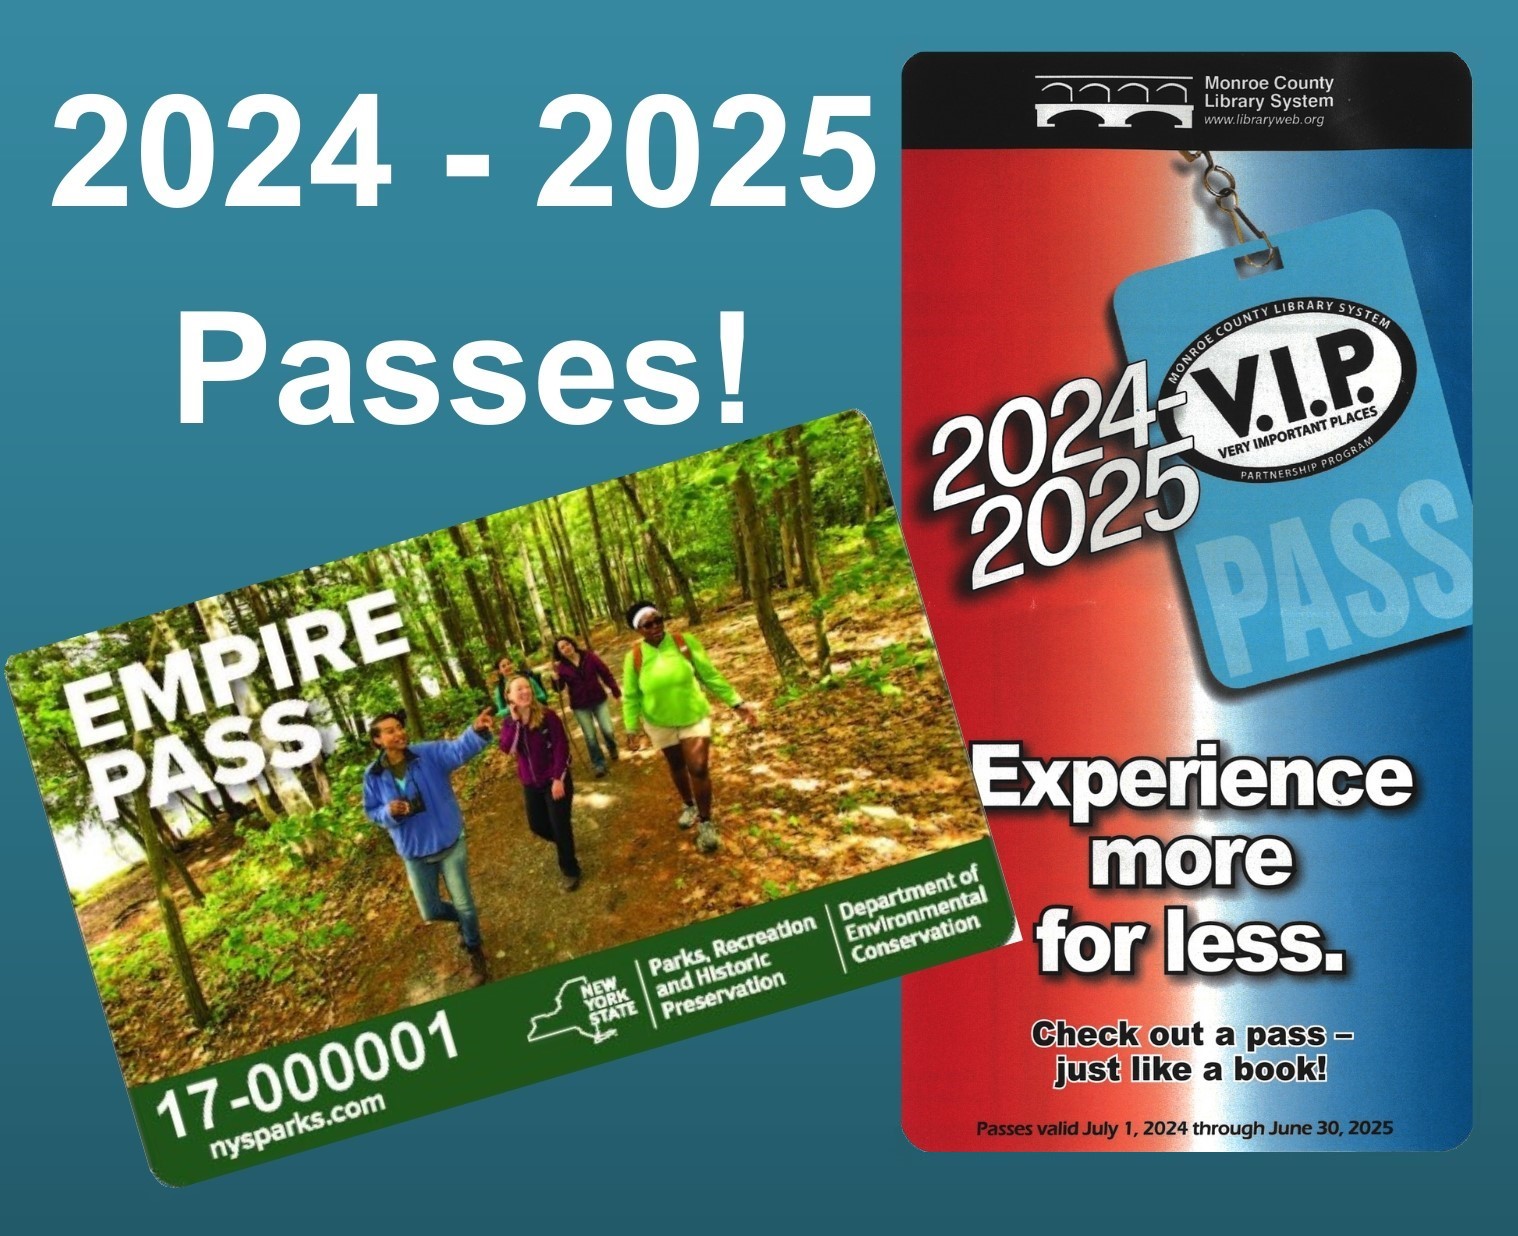 NY Empire Pass and VIP Passes for 2024-2025